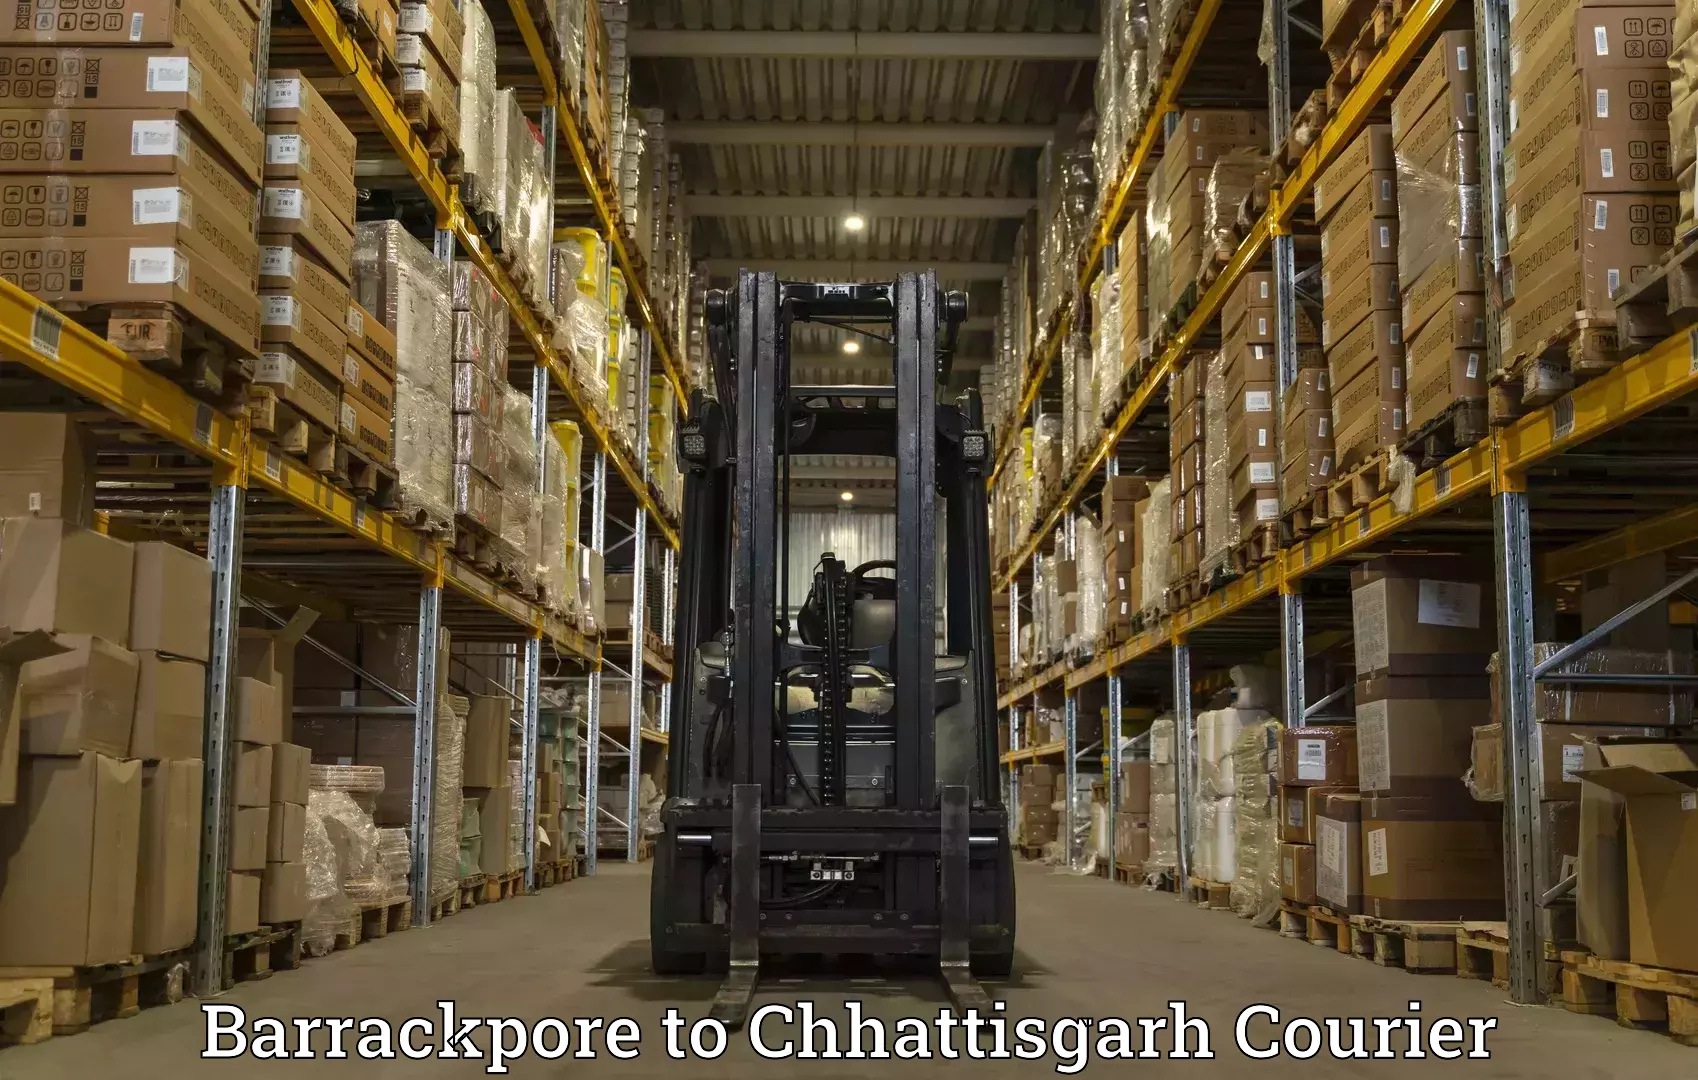 Efficient order fulfillment in Barrackpore to Raigarh